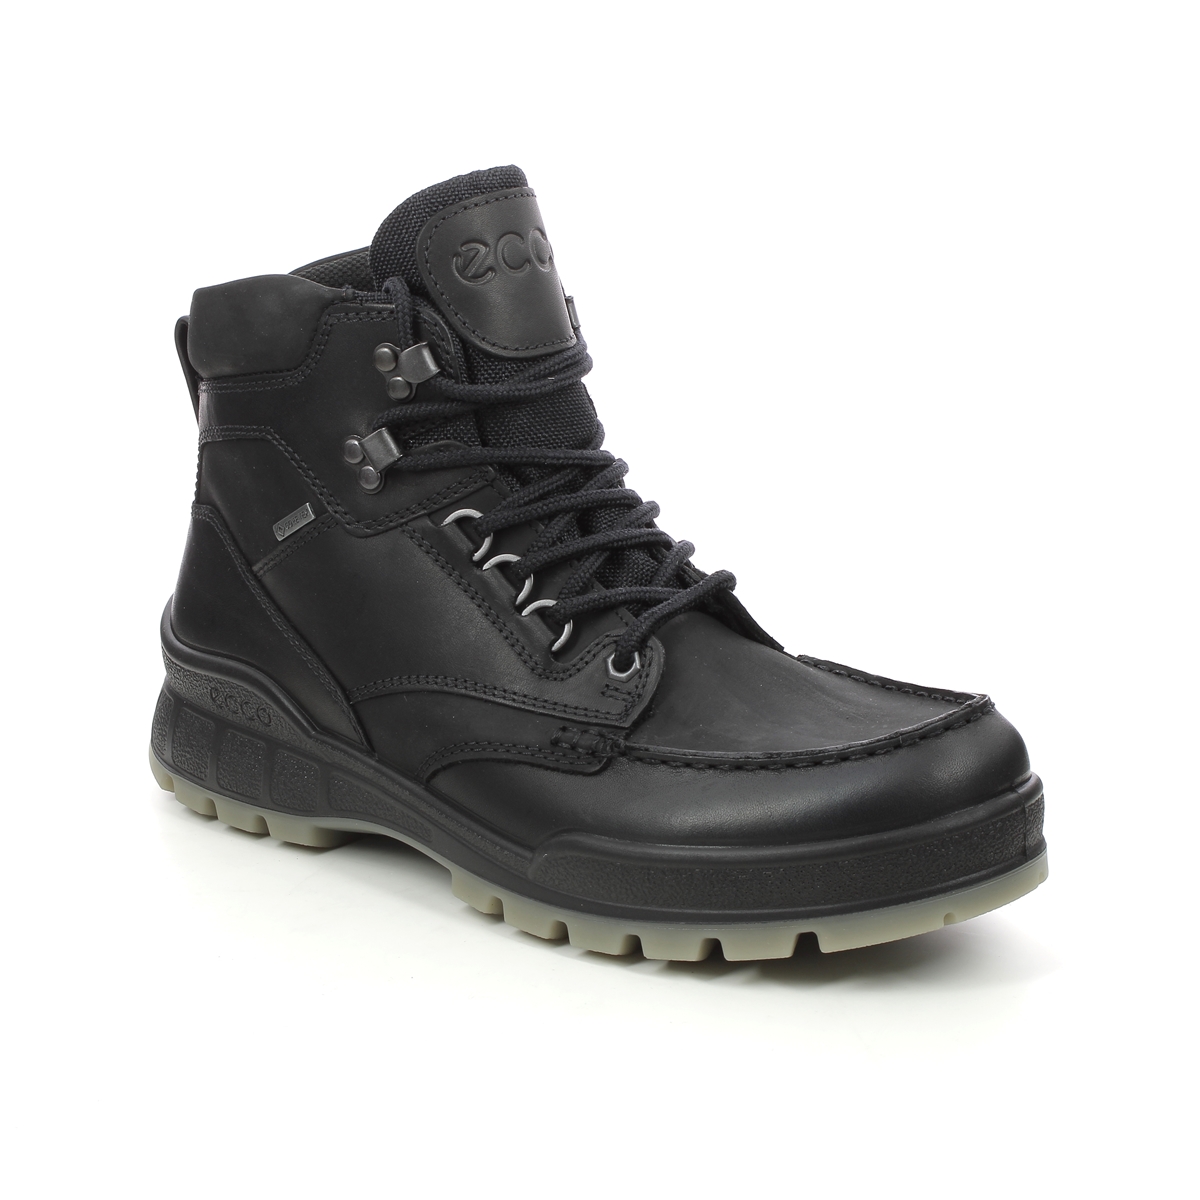 ECCO Track 25 Boot Gtx Black leather Mens Outdoor Walking Boots 831704-51052 in a Plain Leather in Size 43